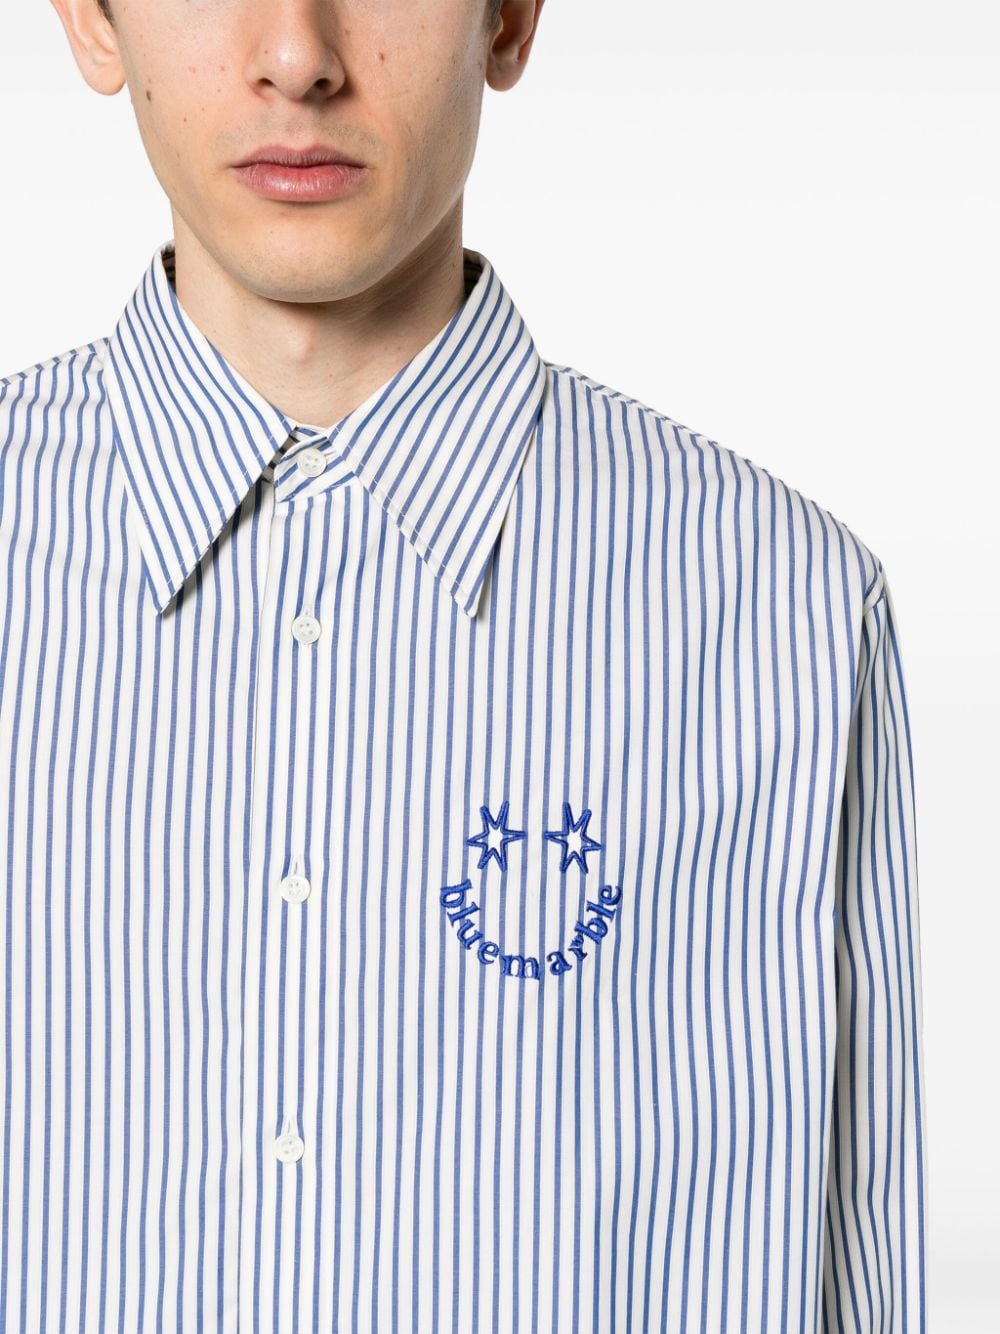 embroidered-logo striped shirt - 5